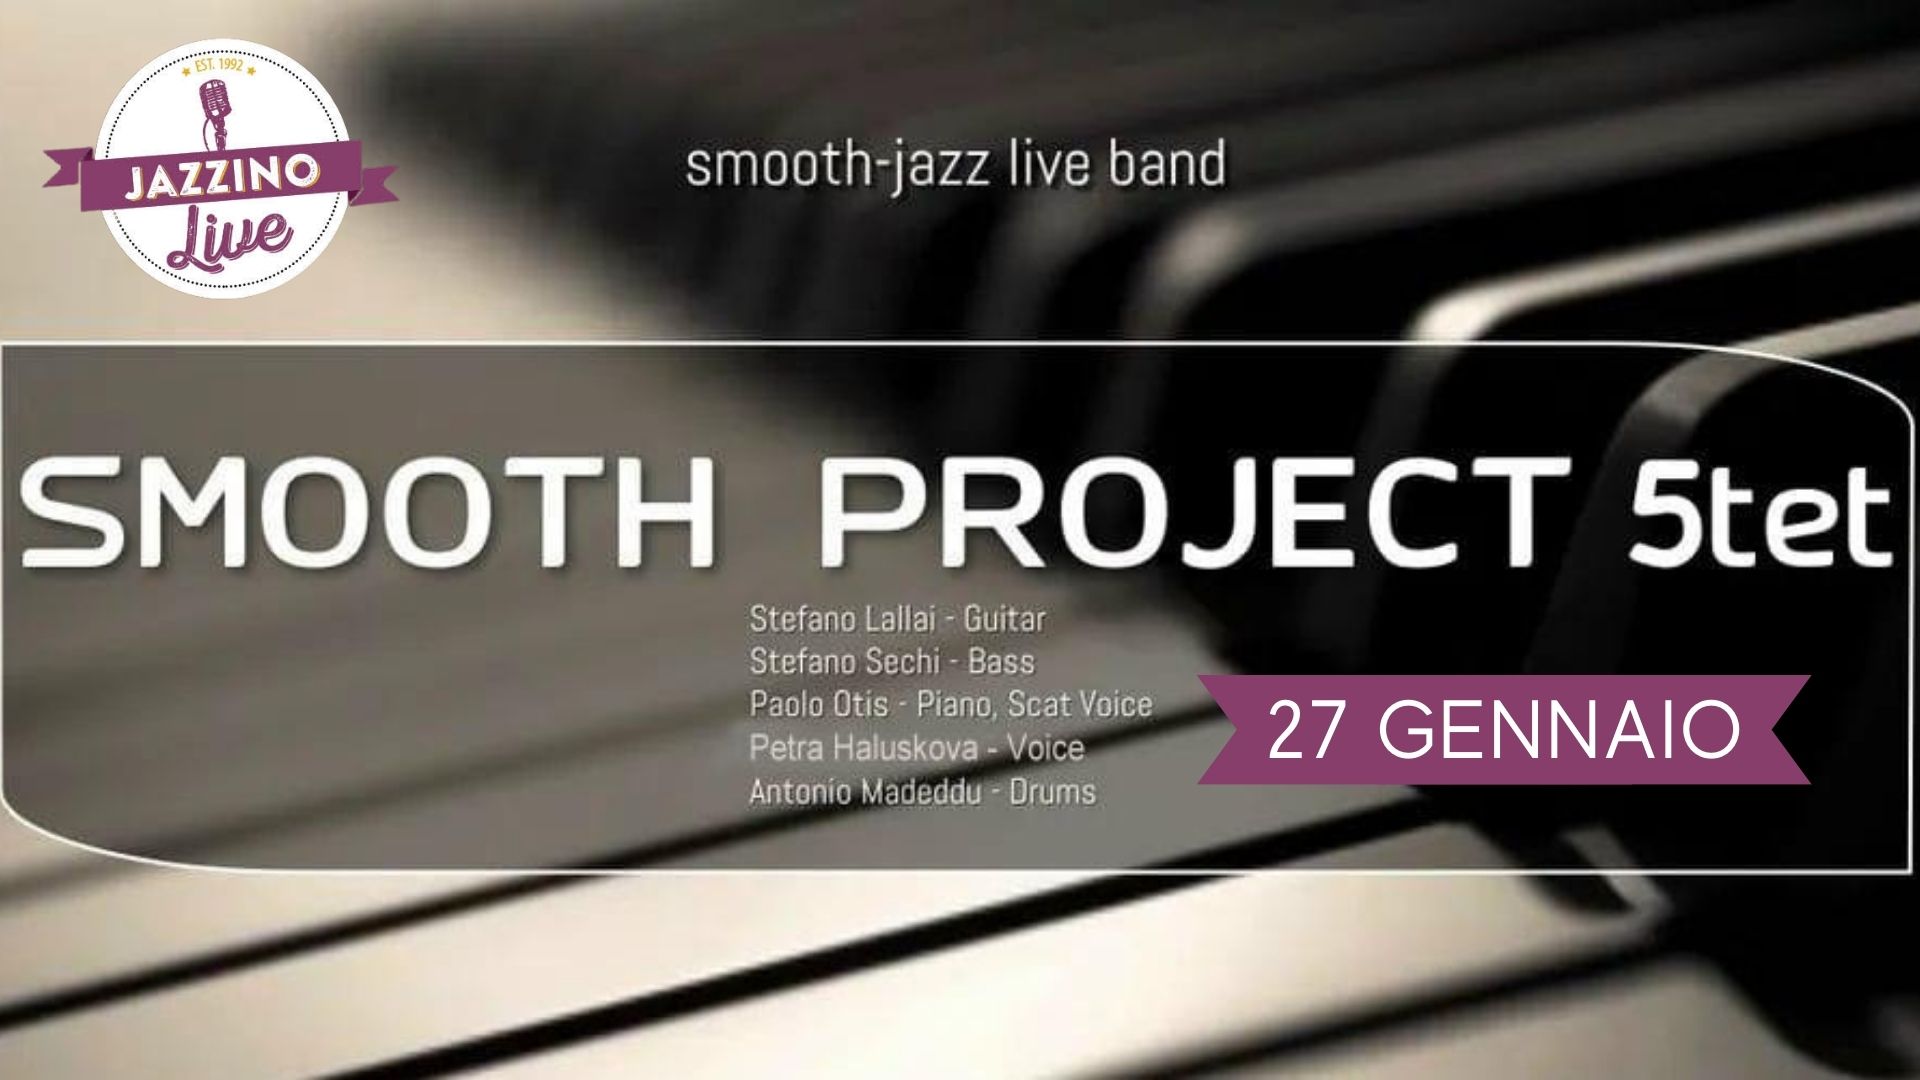 the-smooth-project-5et-live-jazzino